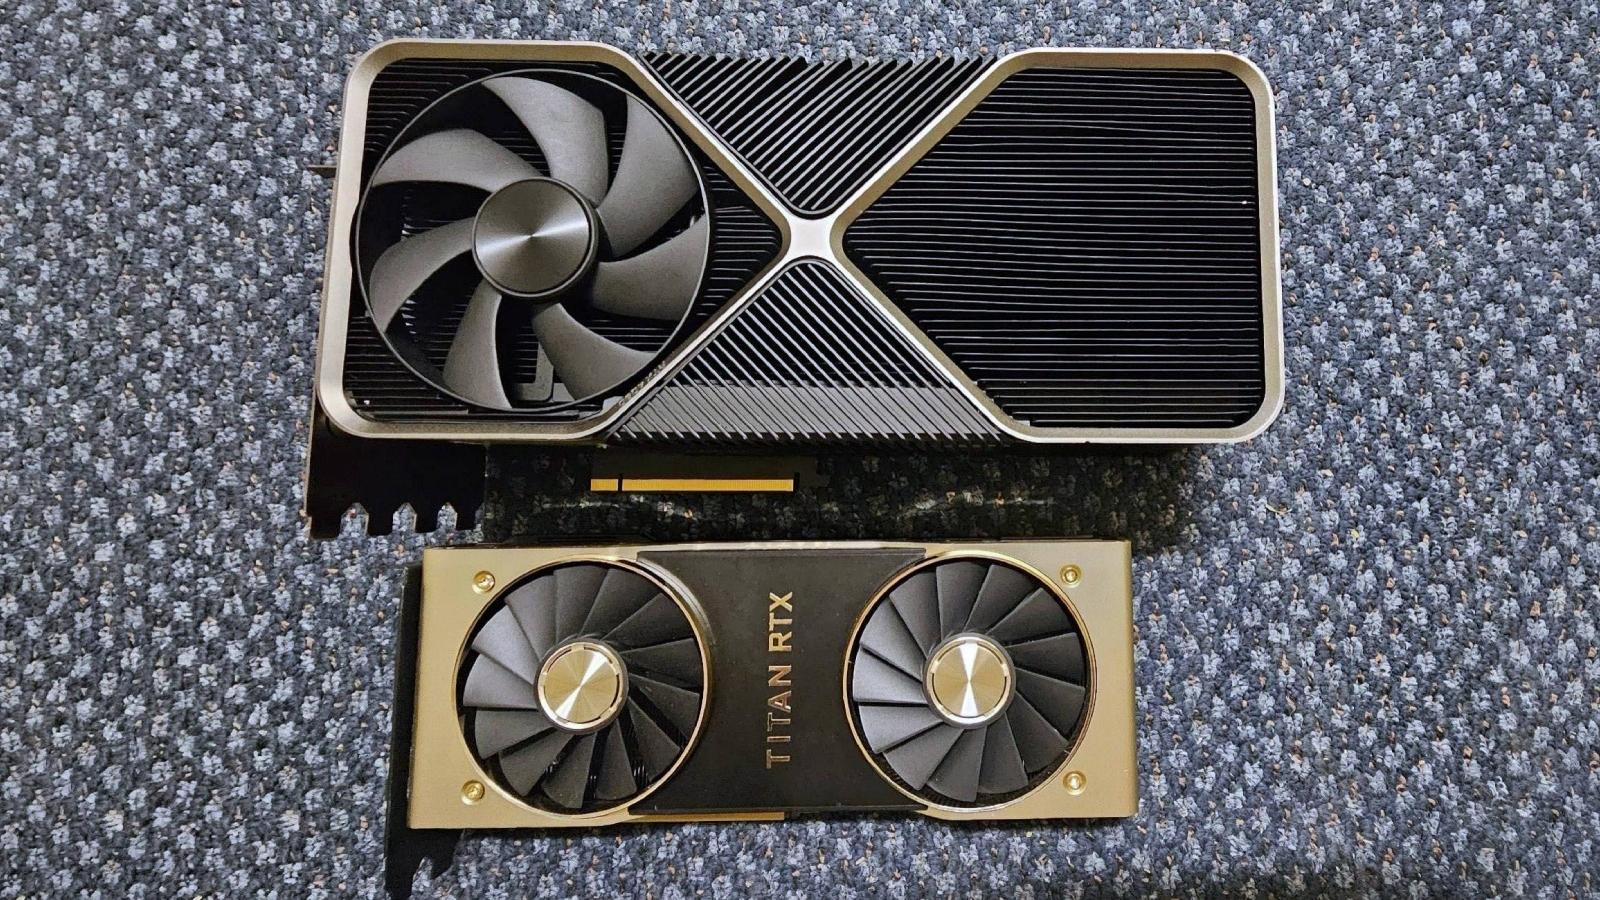 Nvidia GeForce RTX 4090 Ti may have featured an unusual fan design